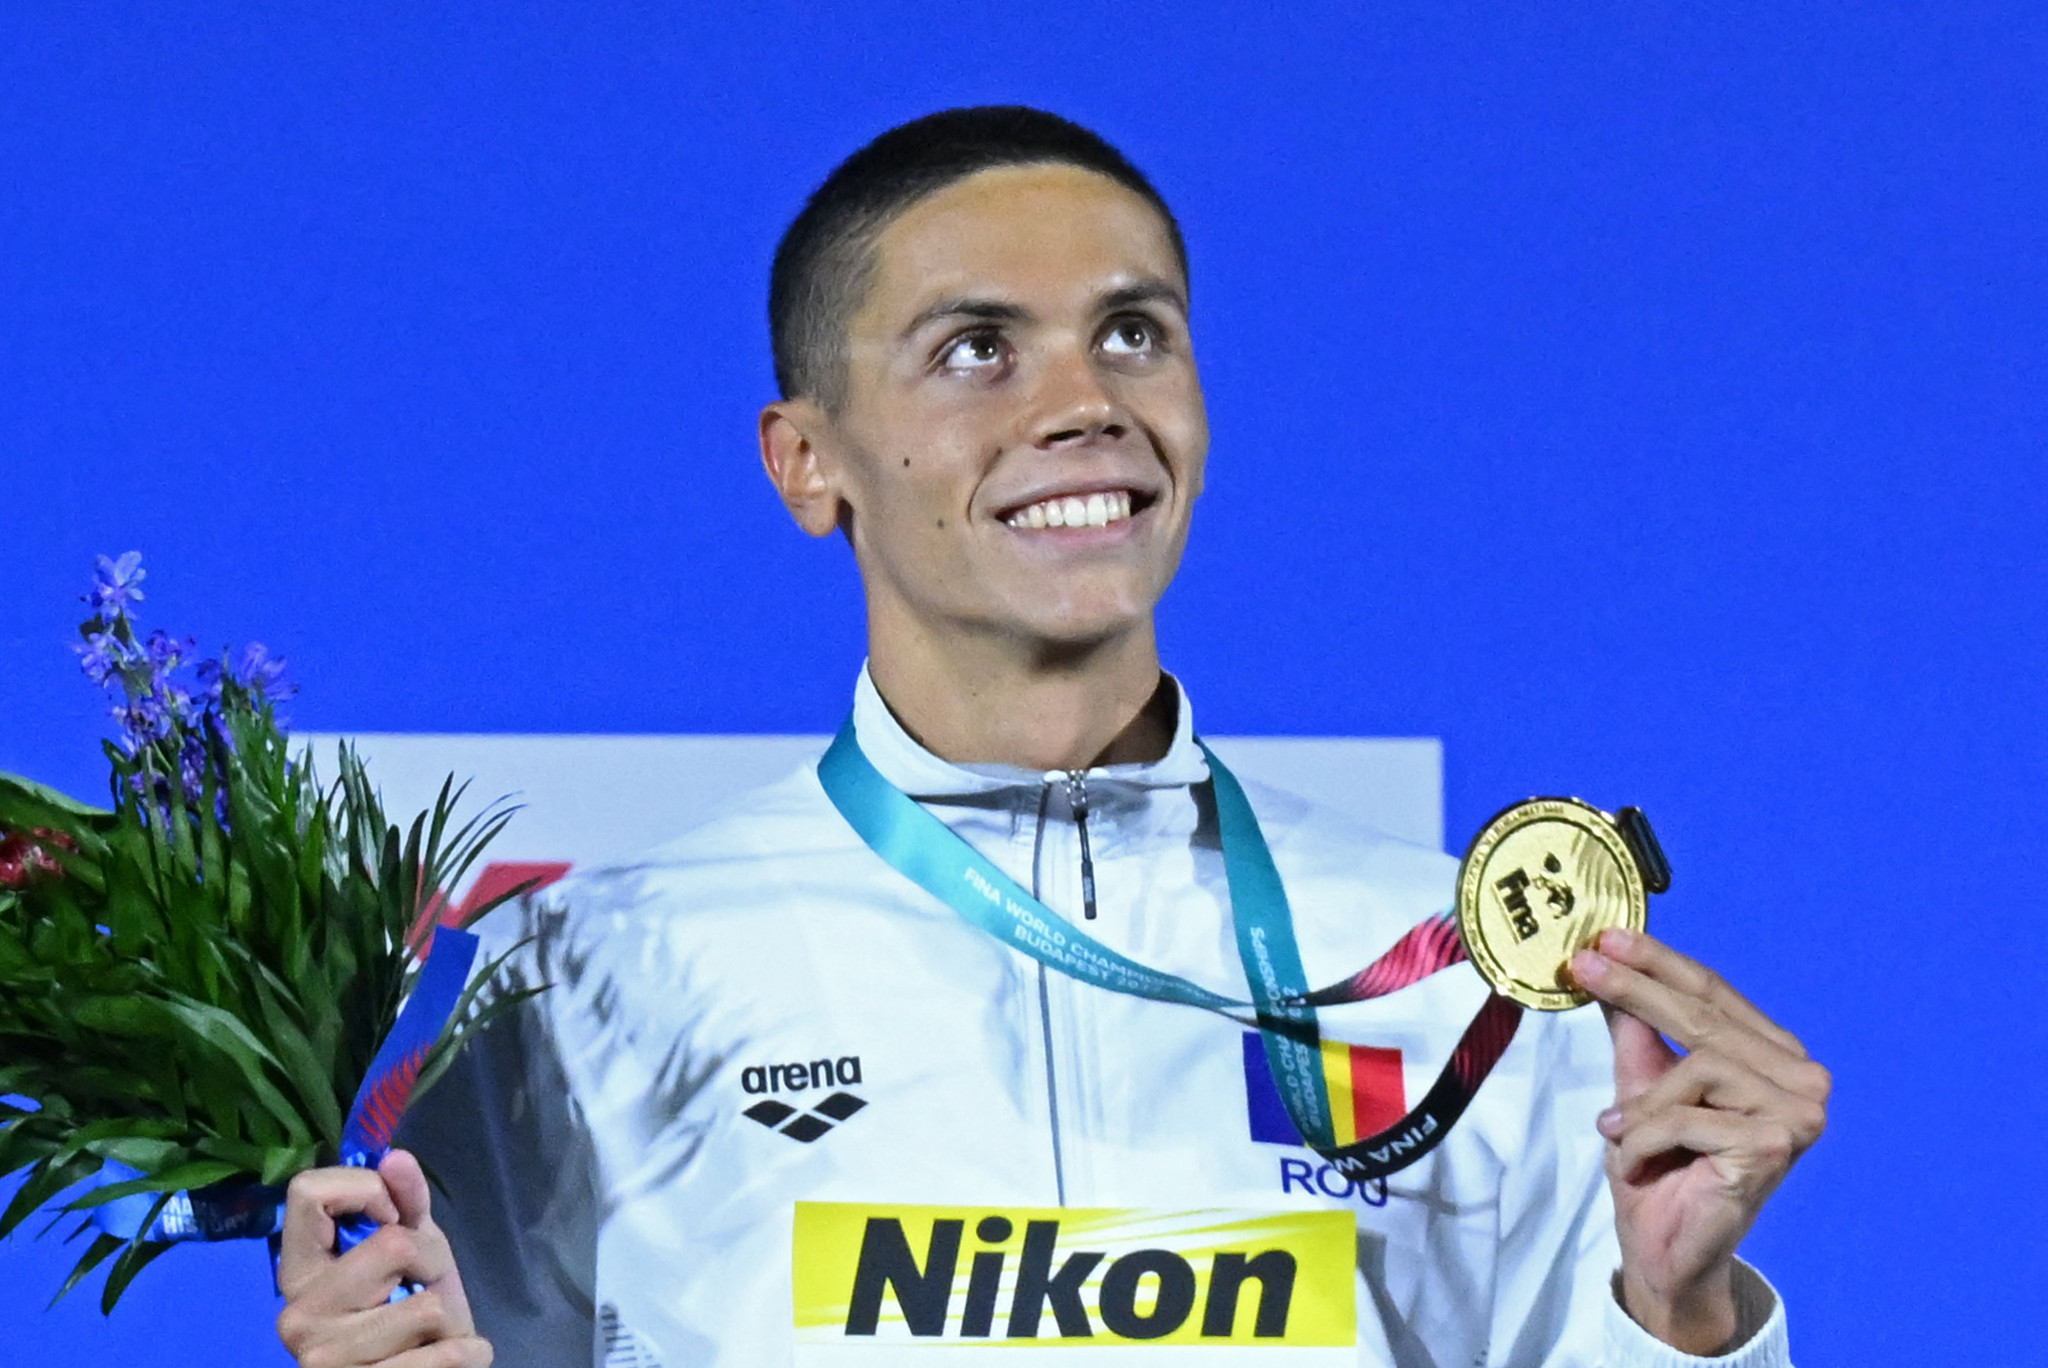 Romania's 17-year-old swimmer David Popovici won his second gold medal of the FINA World Championships in the men's 100m freestyle ©Getty Images